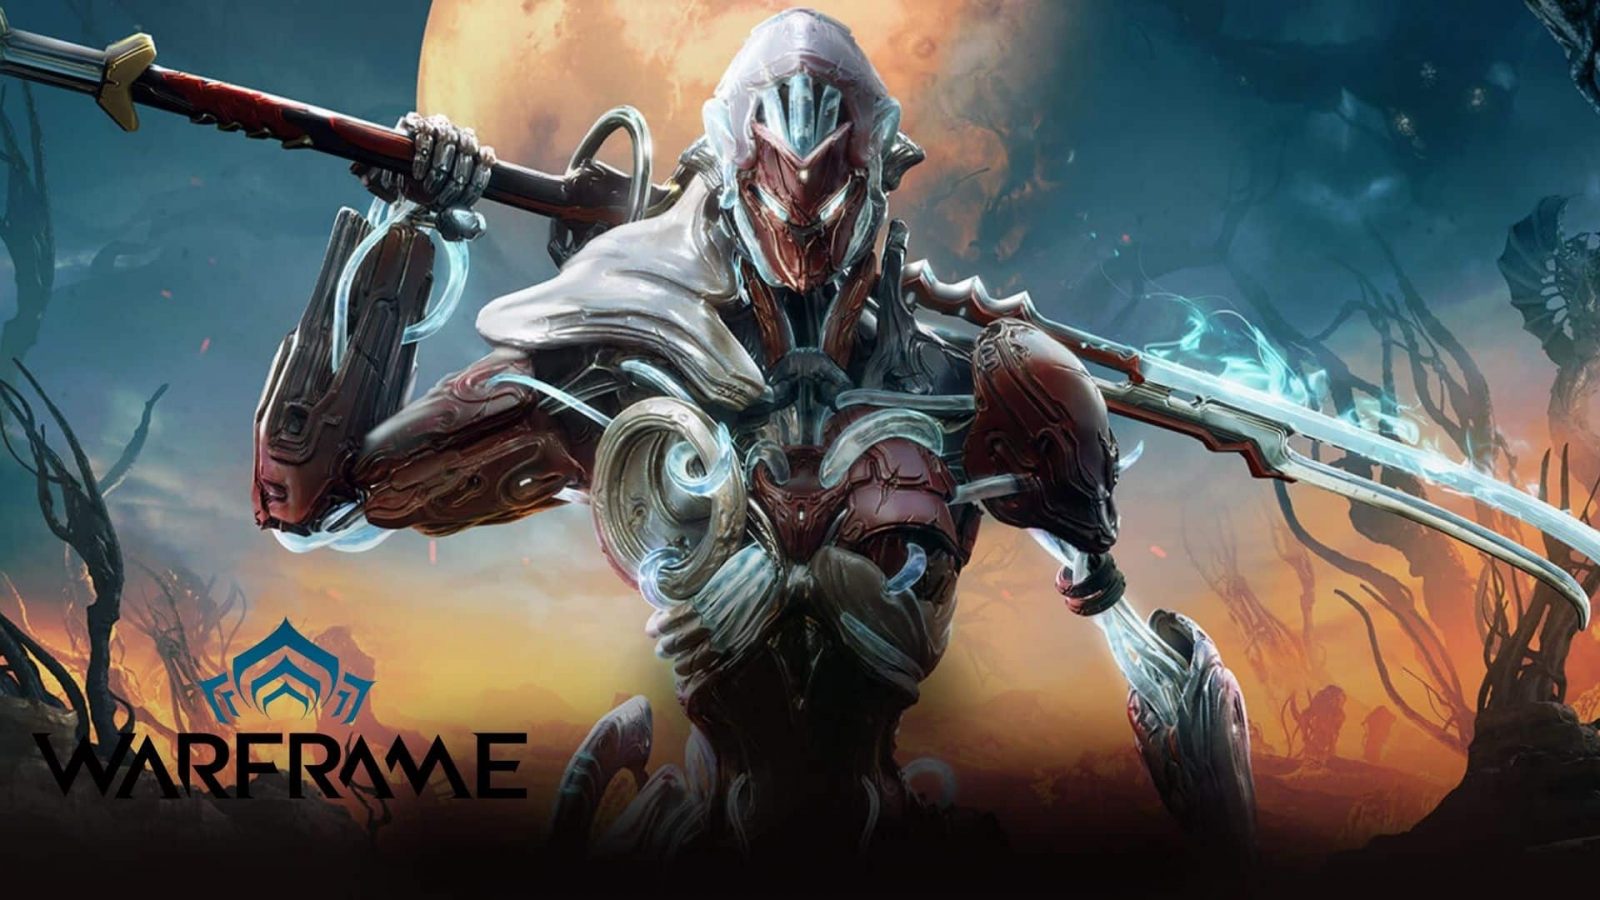 Warframe cross-play: How to link accounts on all platforms & cross